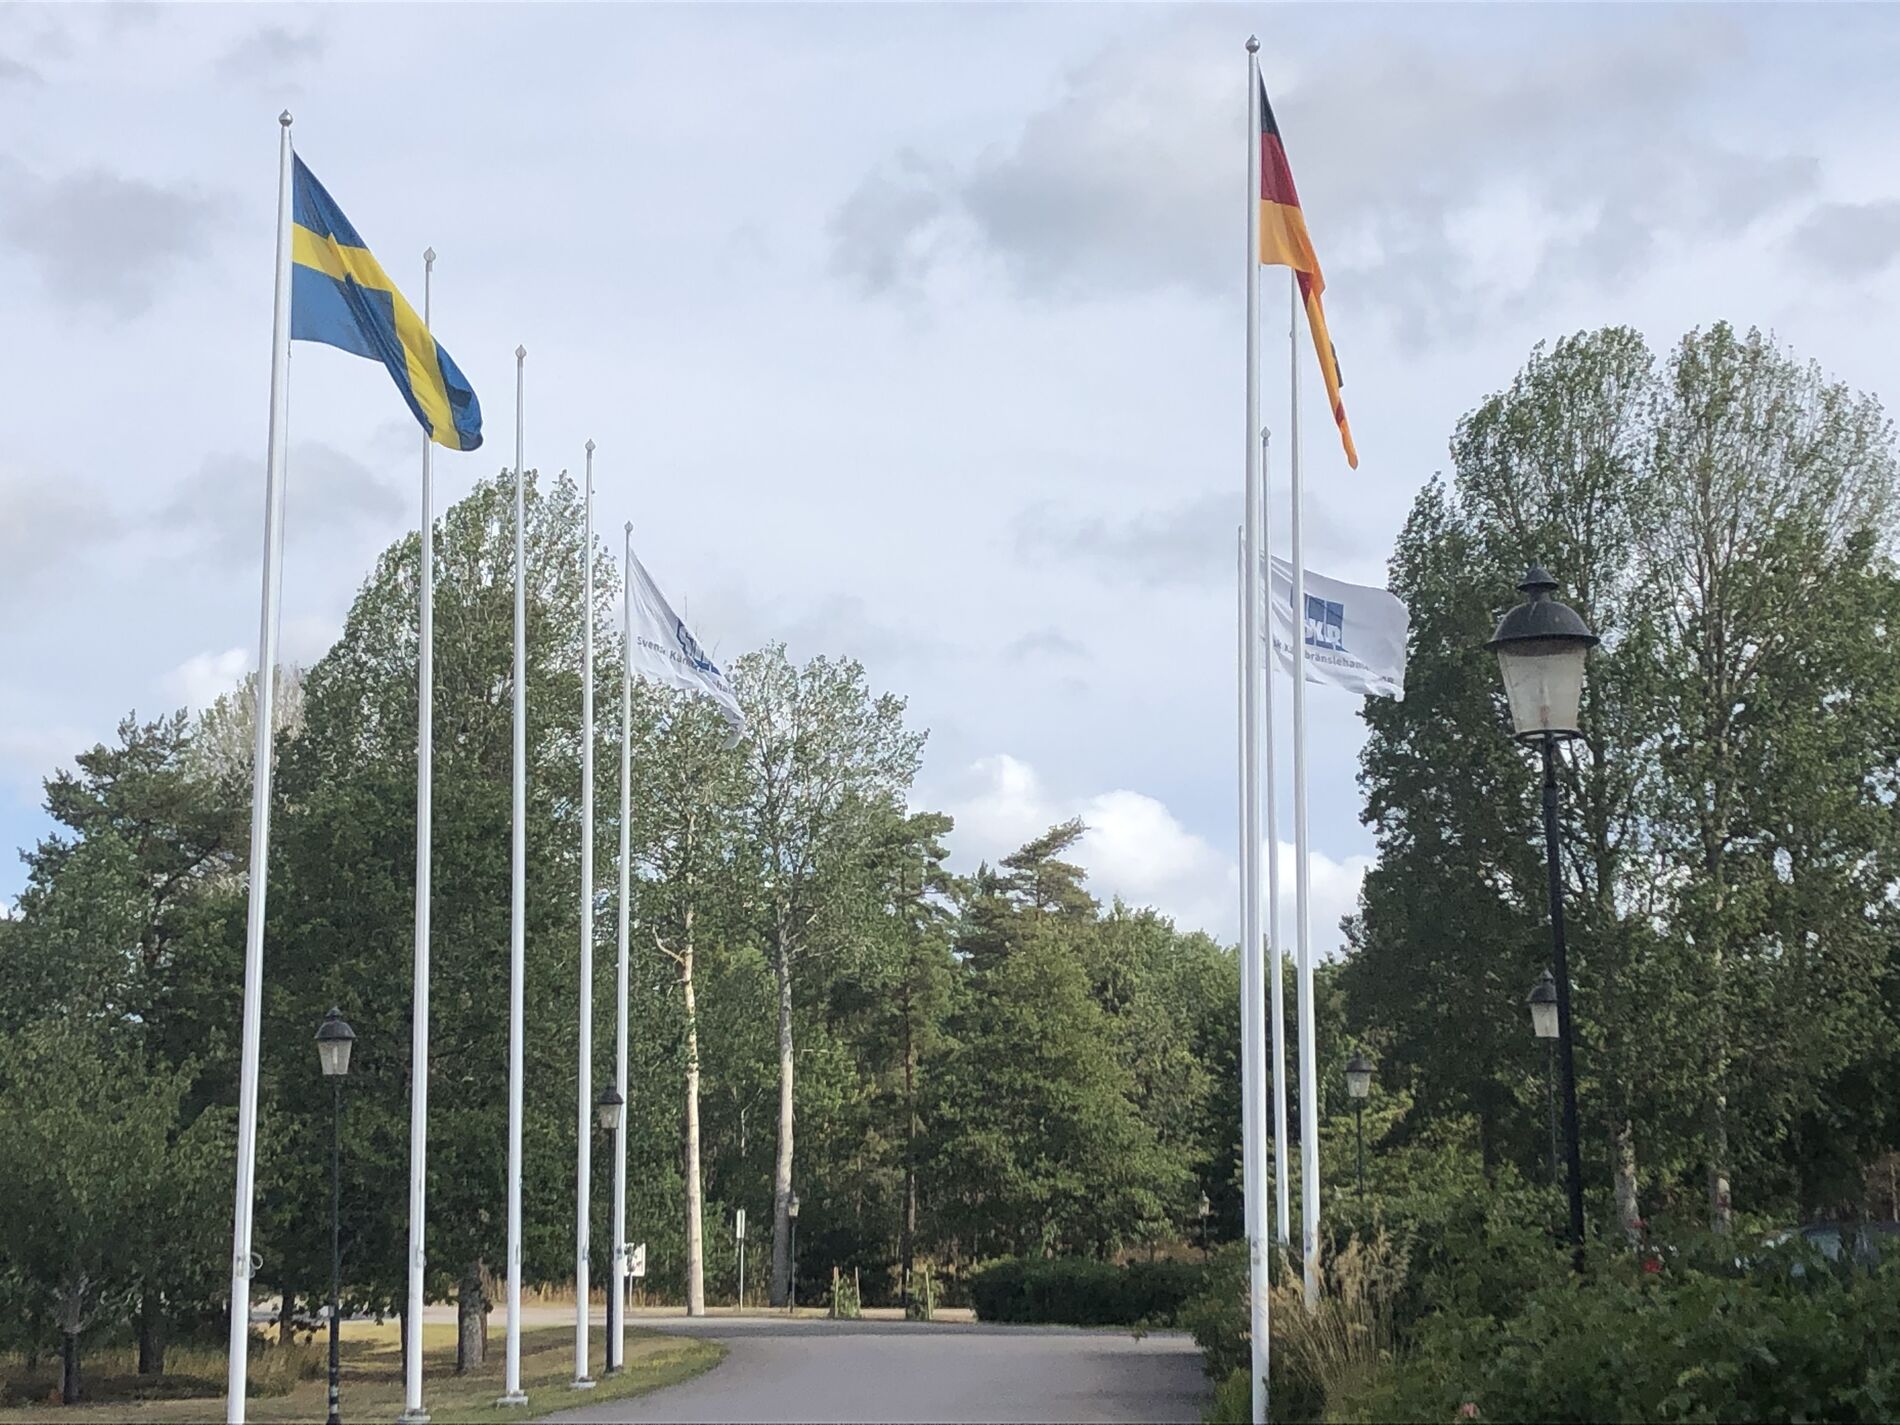 Flagpoles with the Swedish and German flags